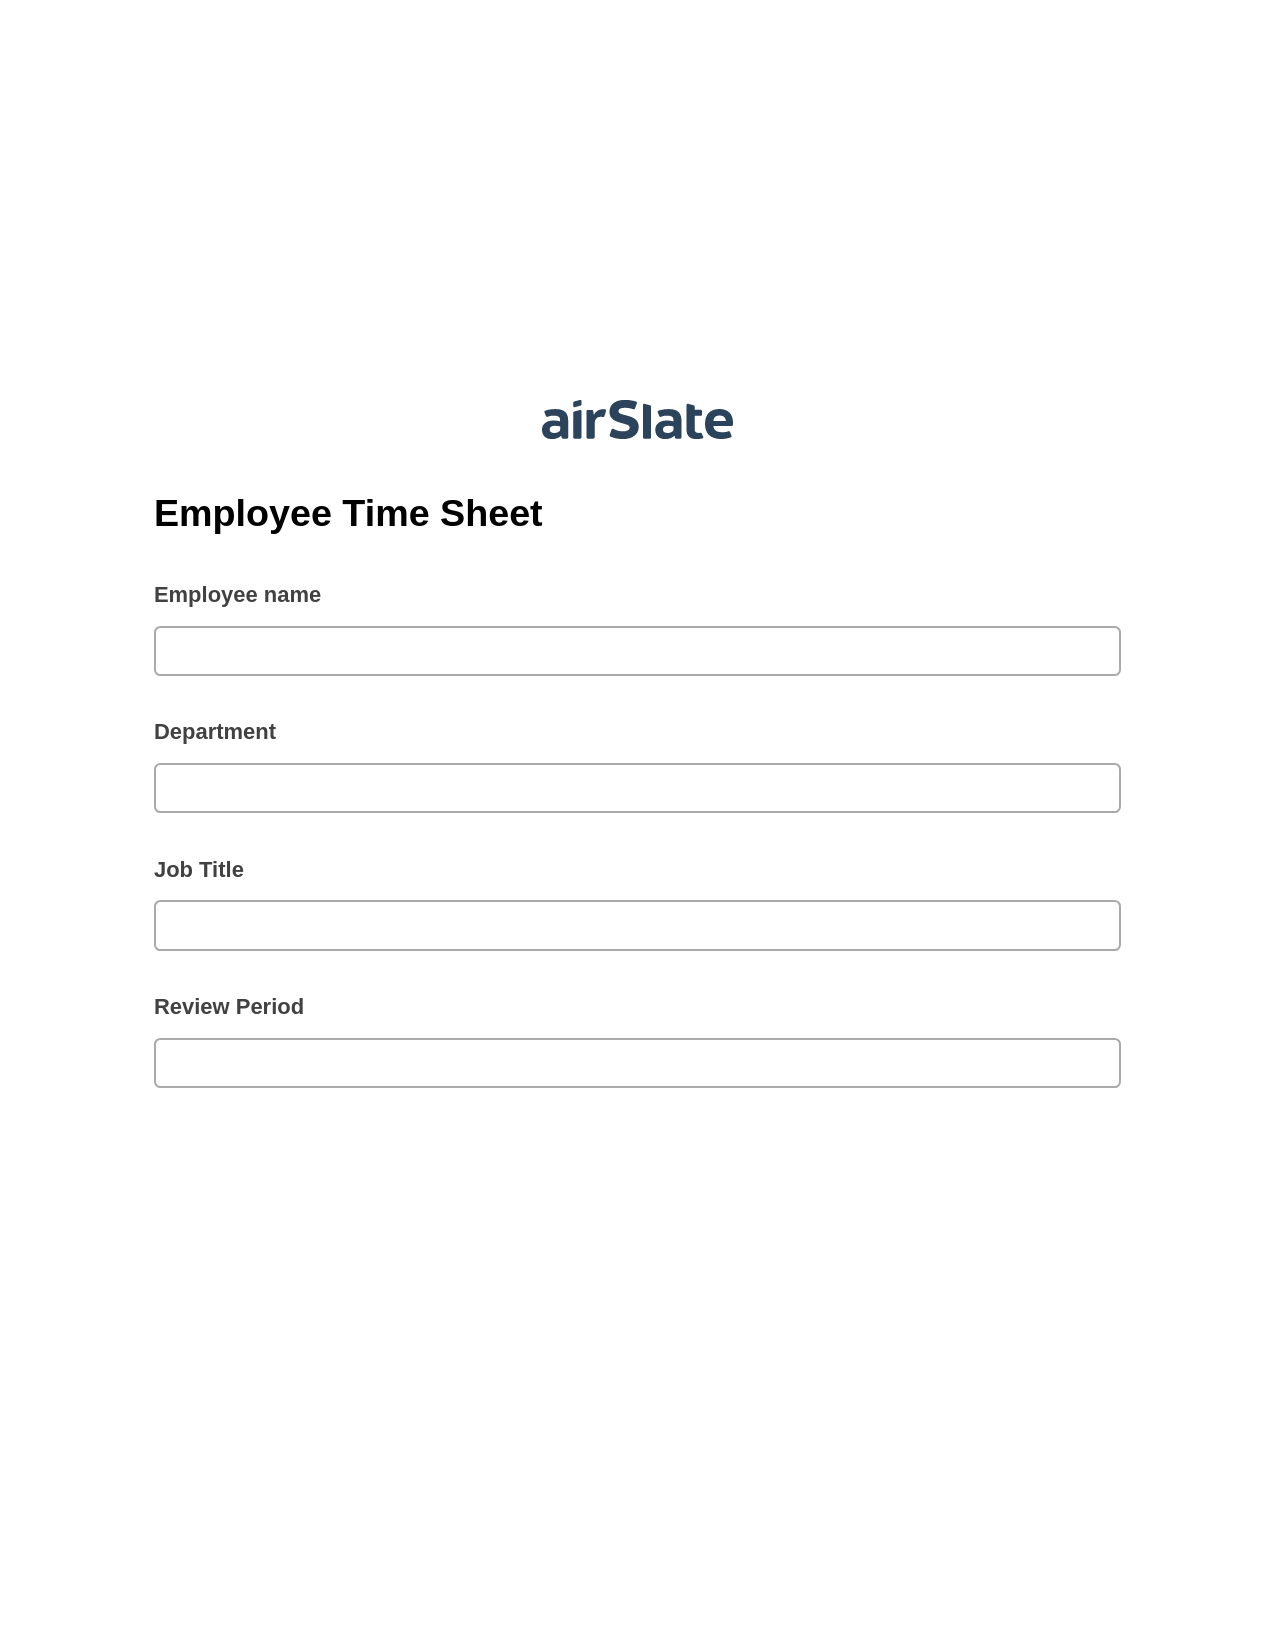 Employee Time Sheet Pre-fill Dropdowns from CSV file Bot, Update Audit Trail Bot, Archive to SharePoint Folder Bot